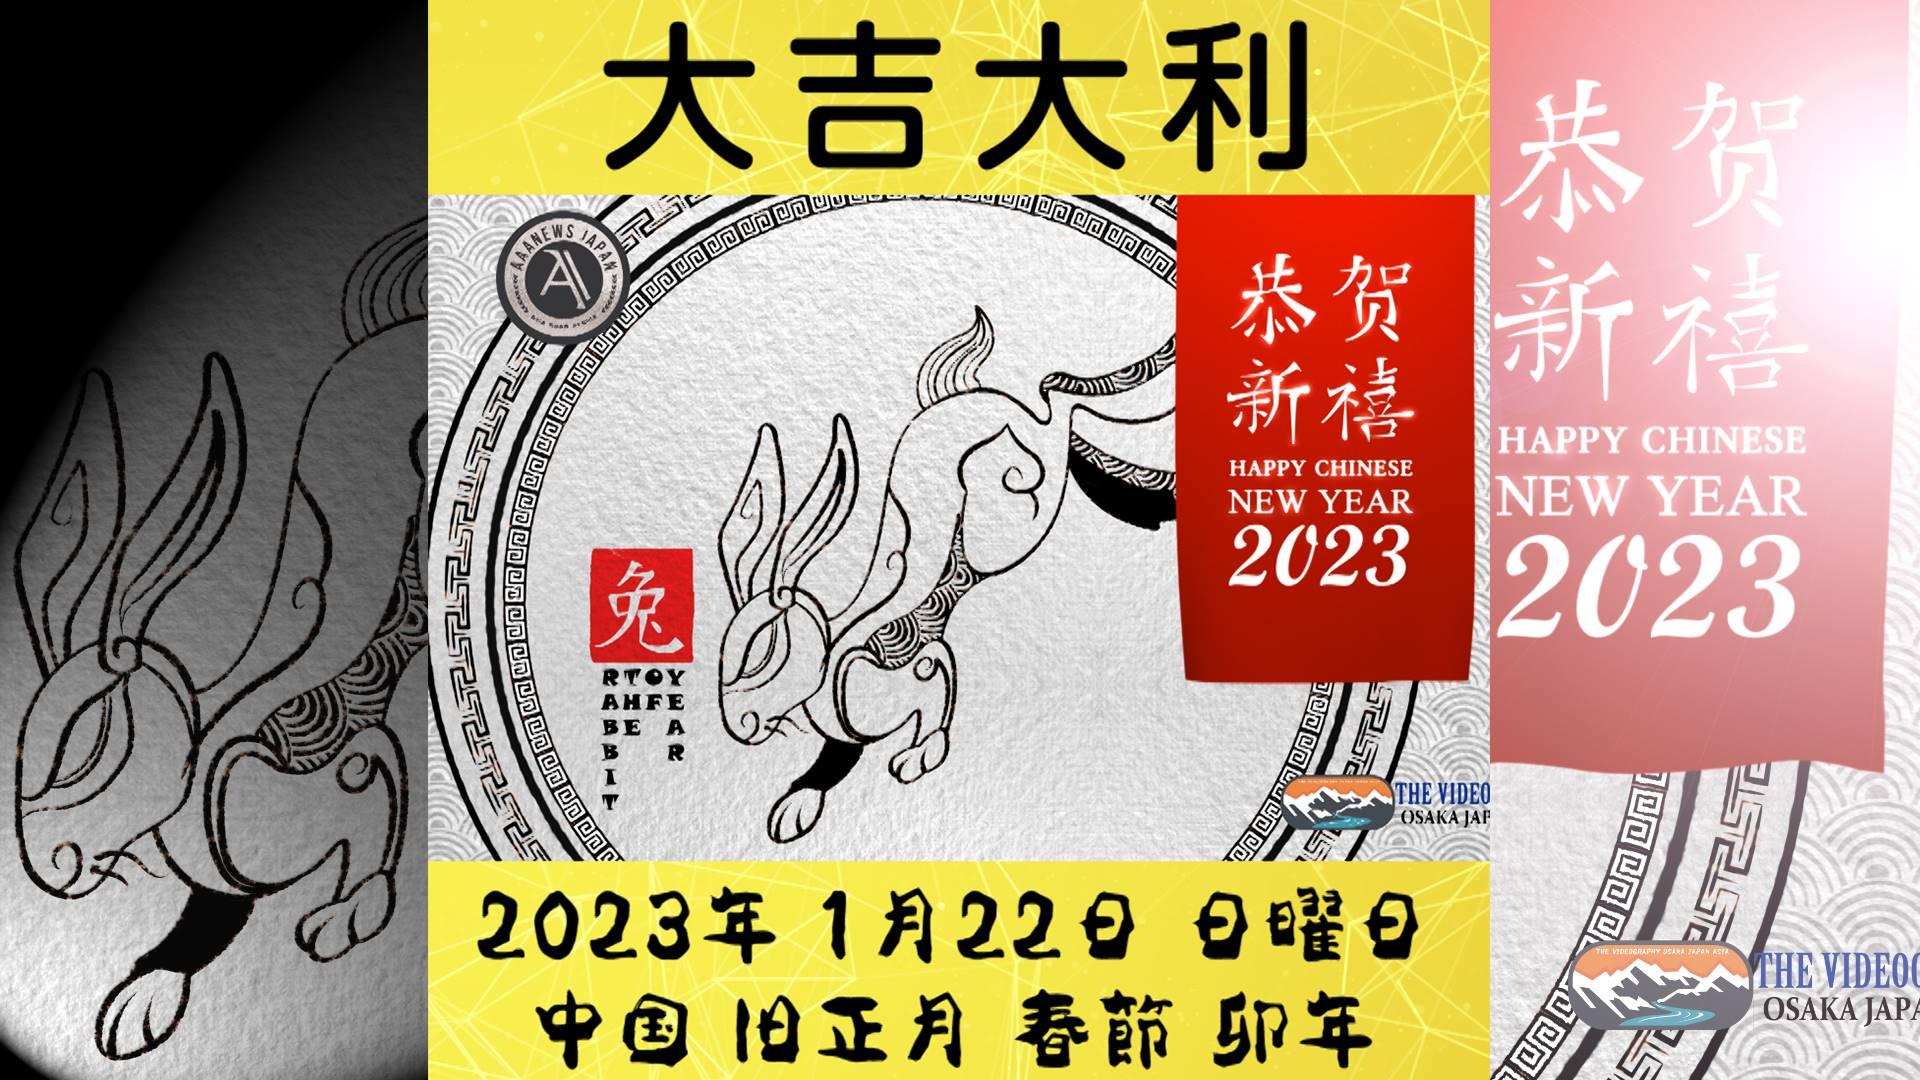 Year of the Rabbit. Chinese New Year